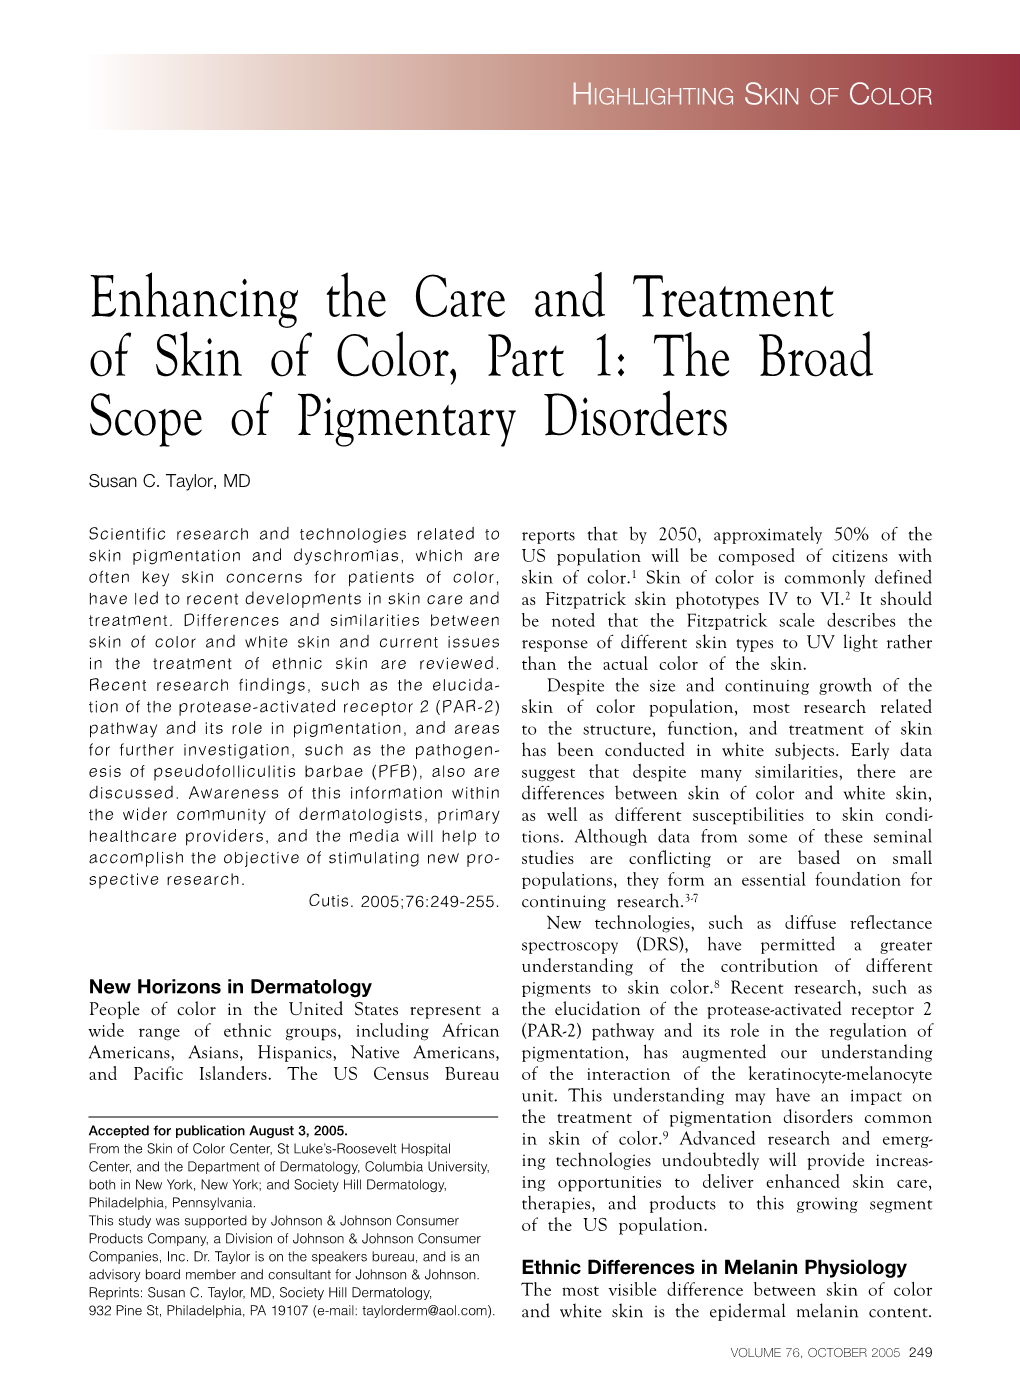 Enhancing the Care and Treatment of Skin of Color, Part 1: the Broad Scope of Pigmentary Disorders